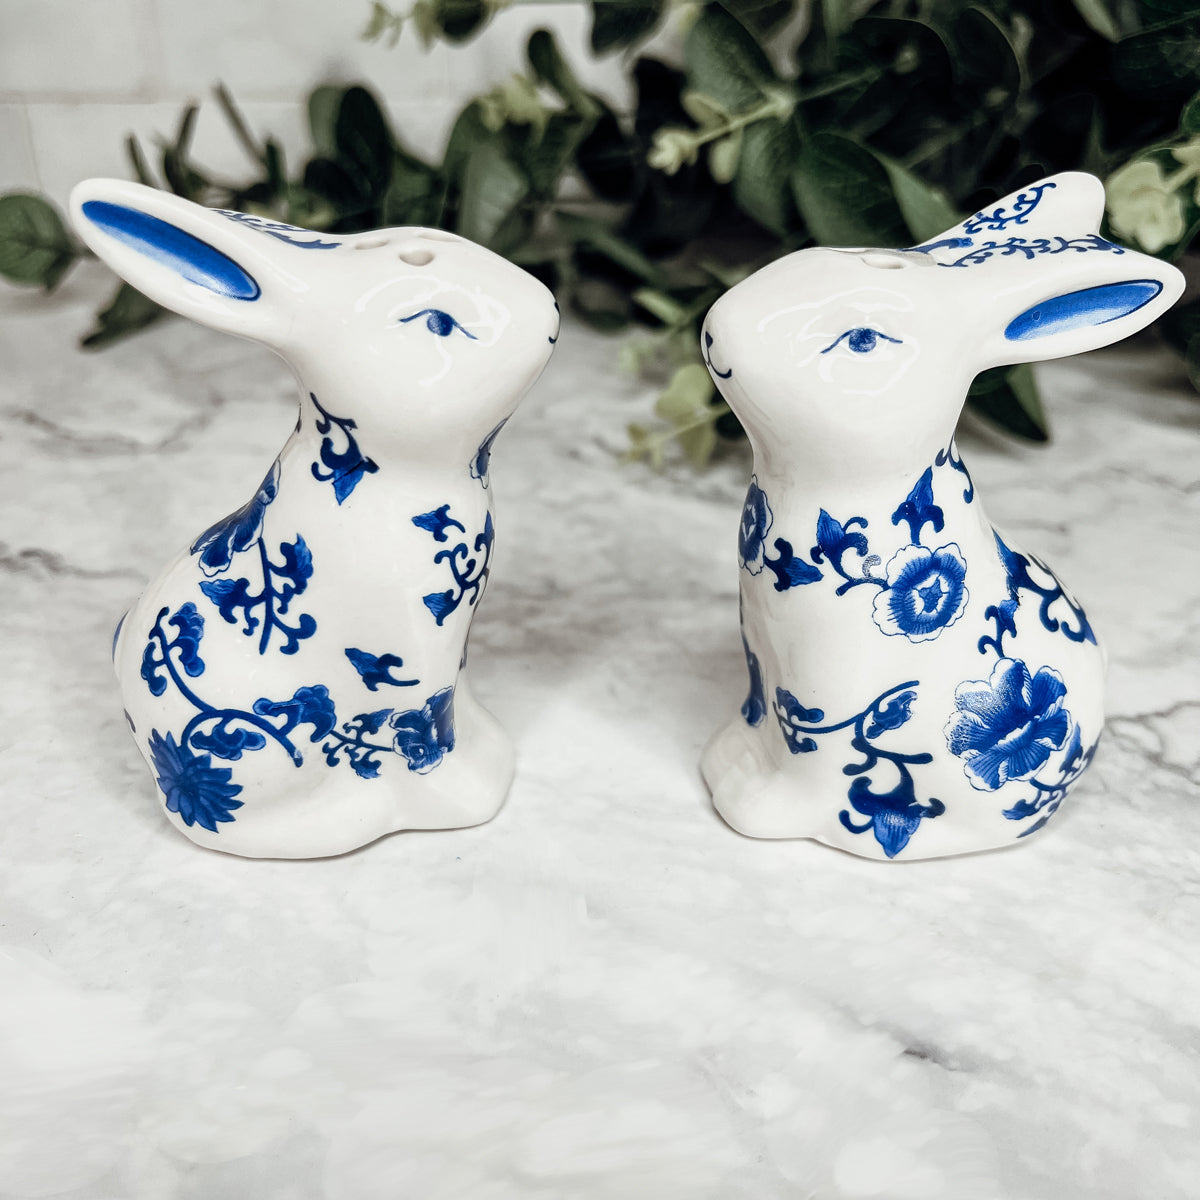 Handmade Salt and Pepper Shakers, Blue and White Bunny